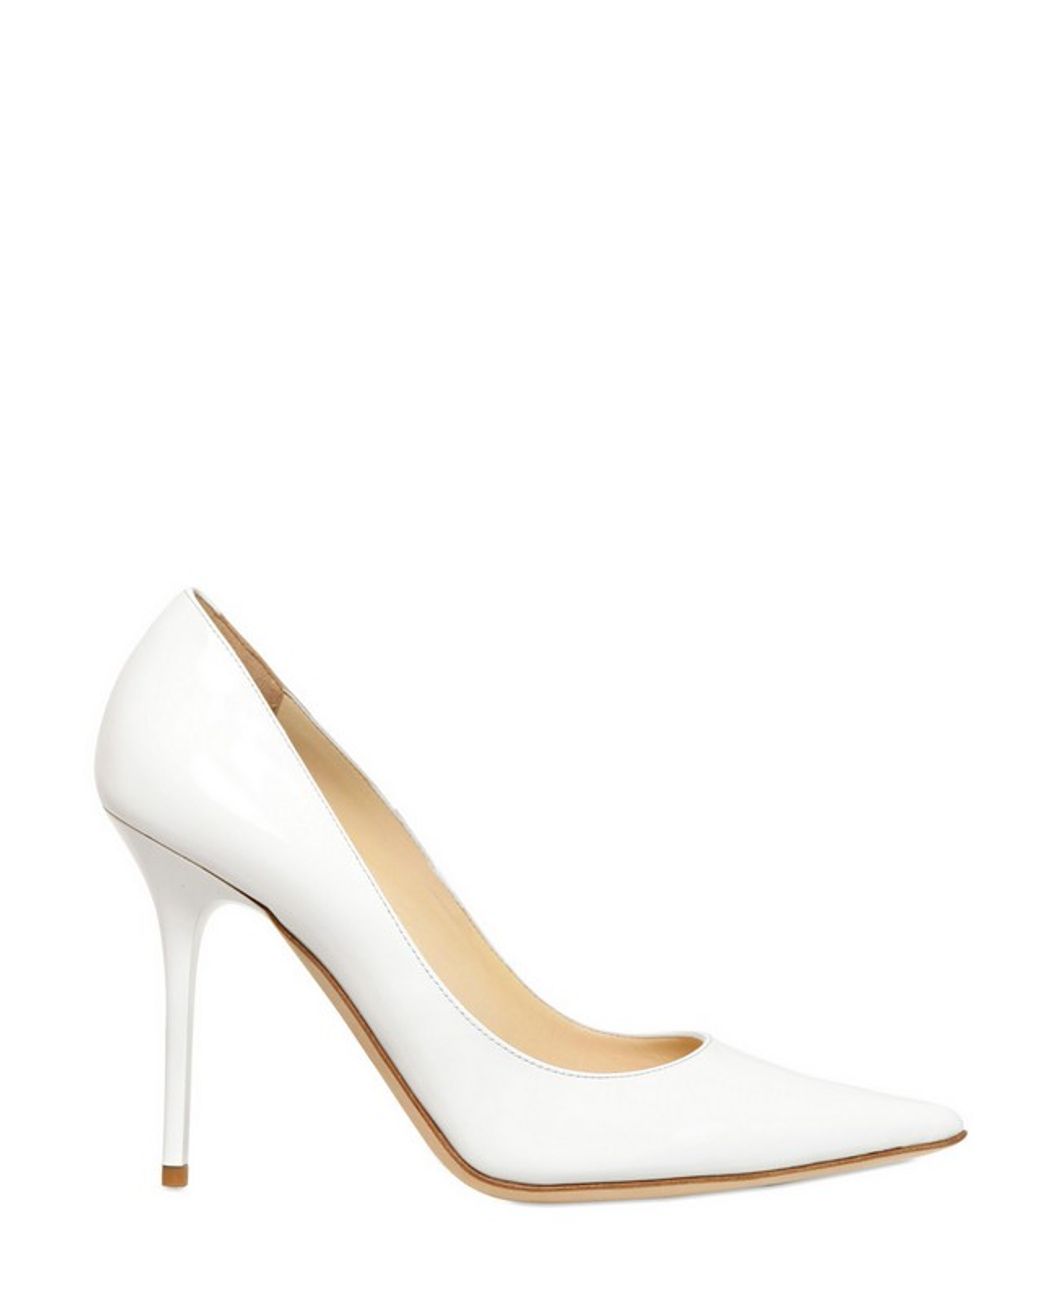 Jimmy Choo 100mm Abel Patent Leather Pointy Pumps in White | Lyst